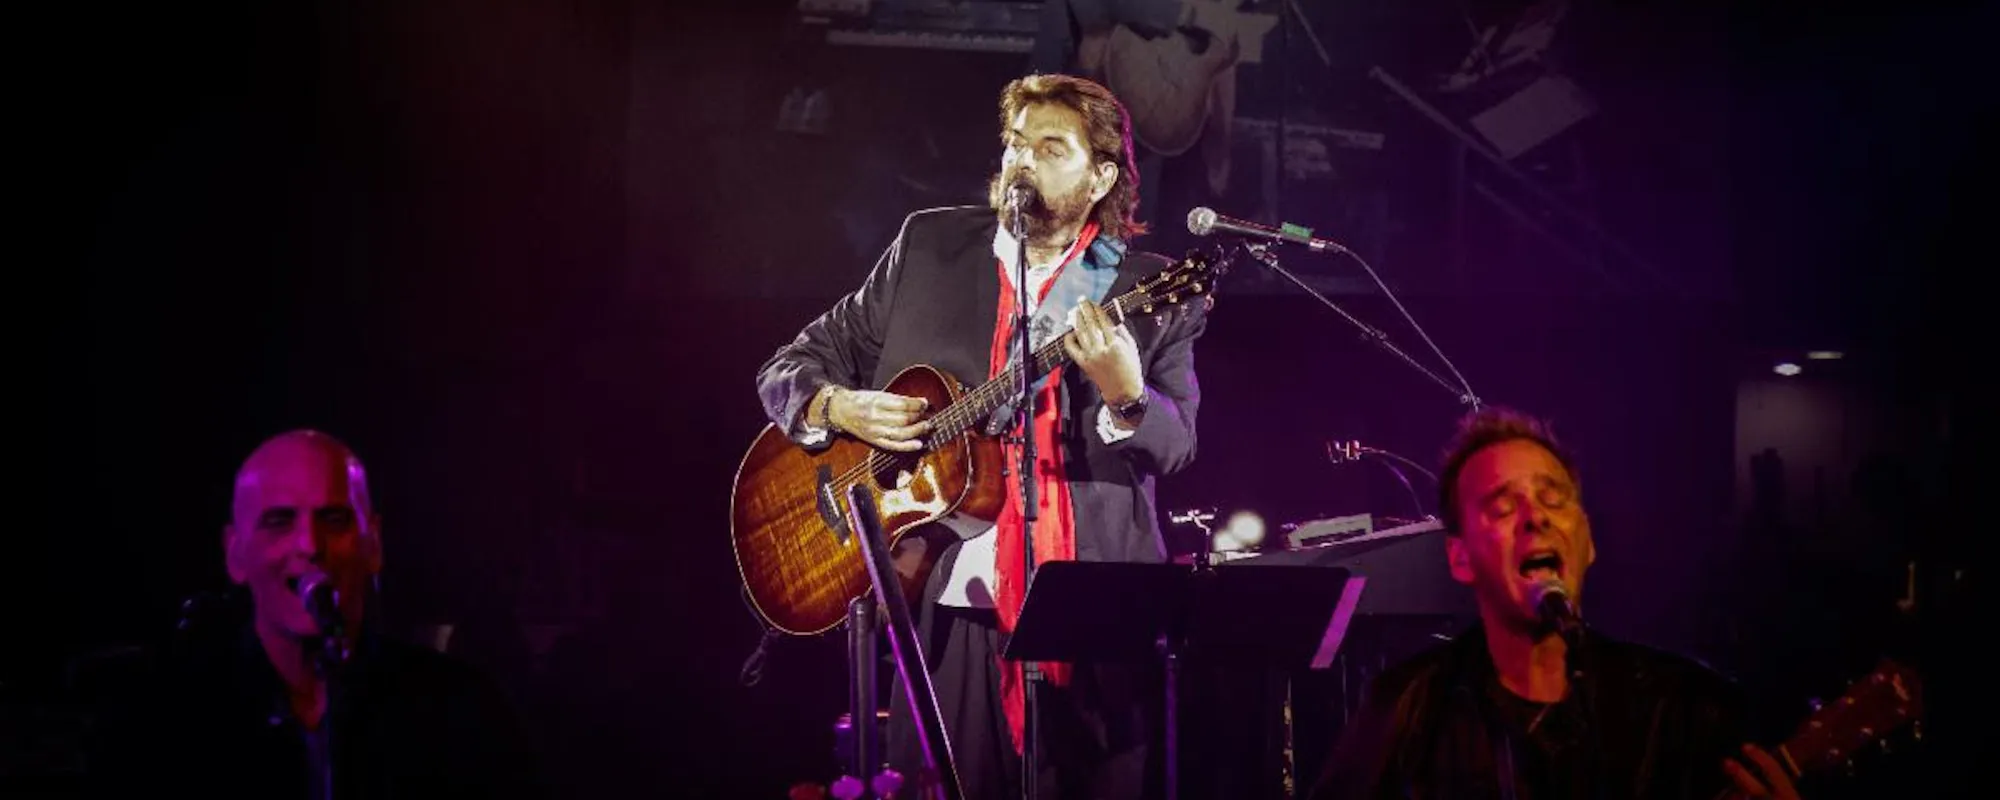 Alan Parsons Releases Sixth Album ‘From the New World,’ Featuring James Durbin, Joe Bonamassa and More